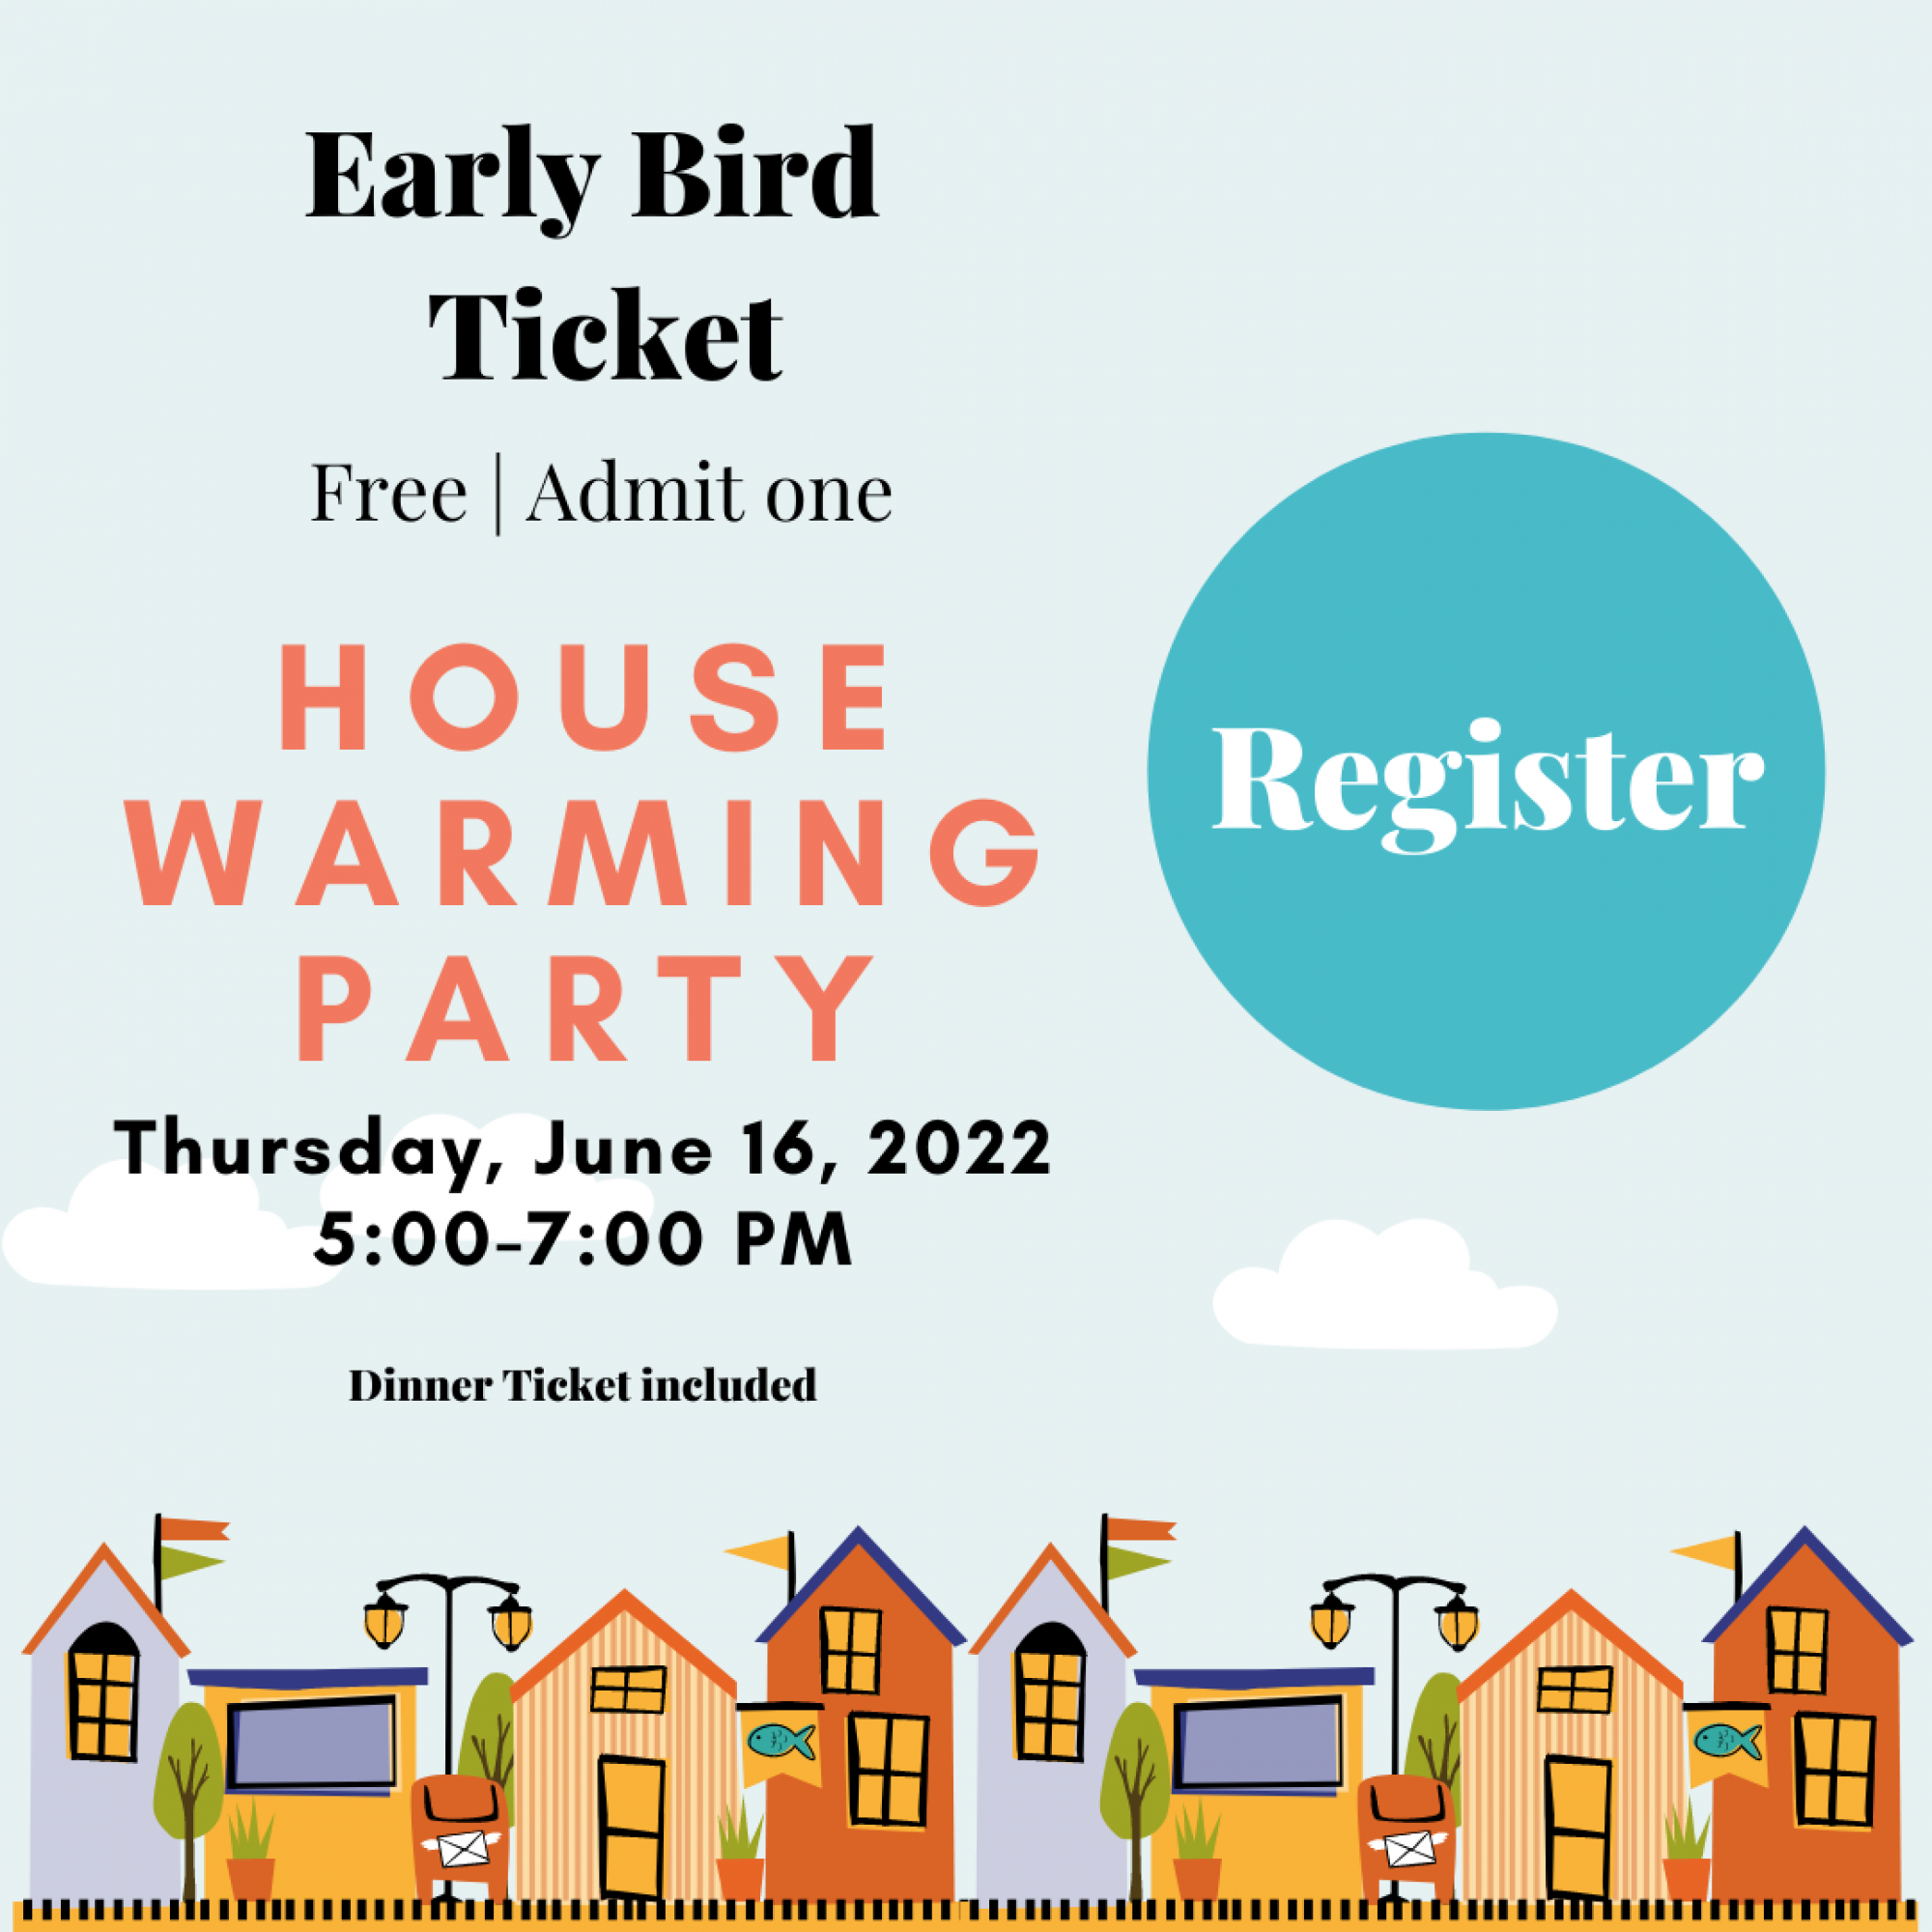 House Warming Party Registration